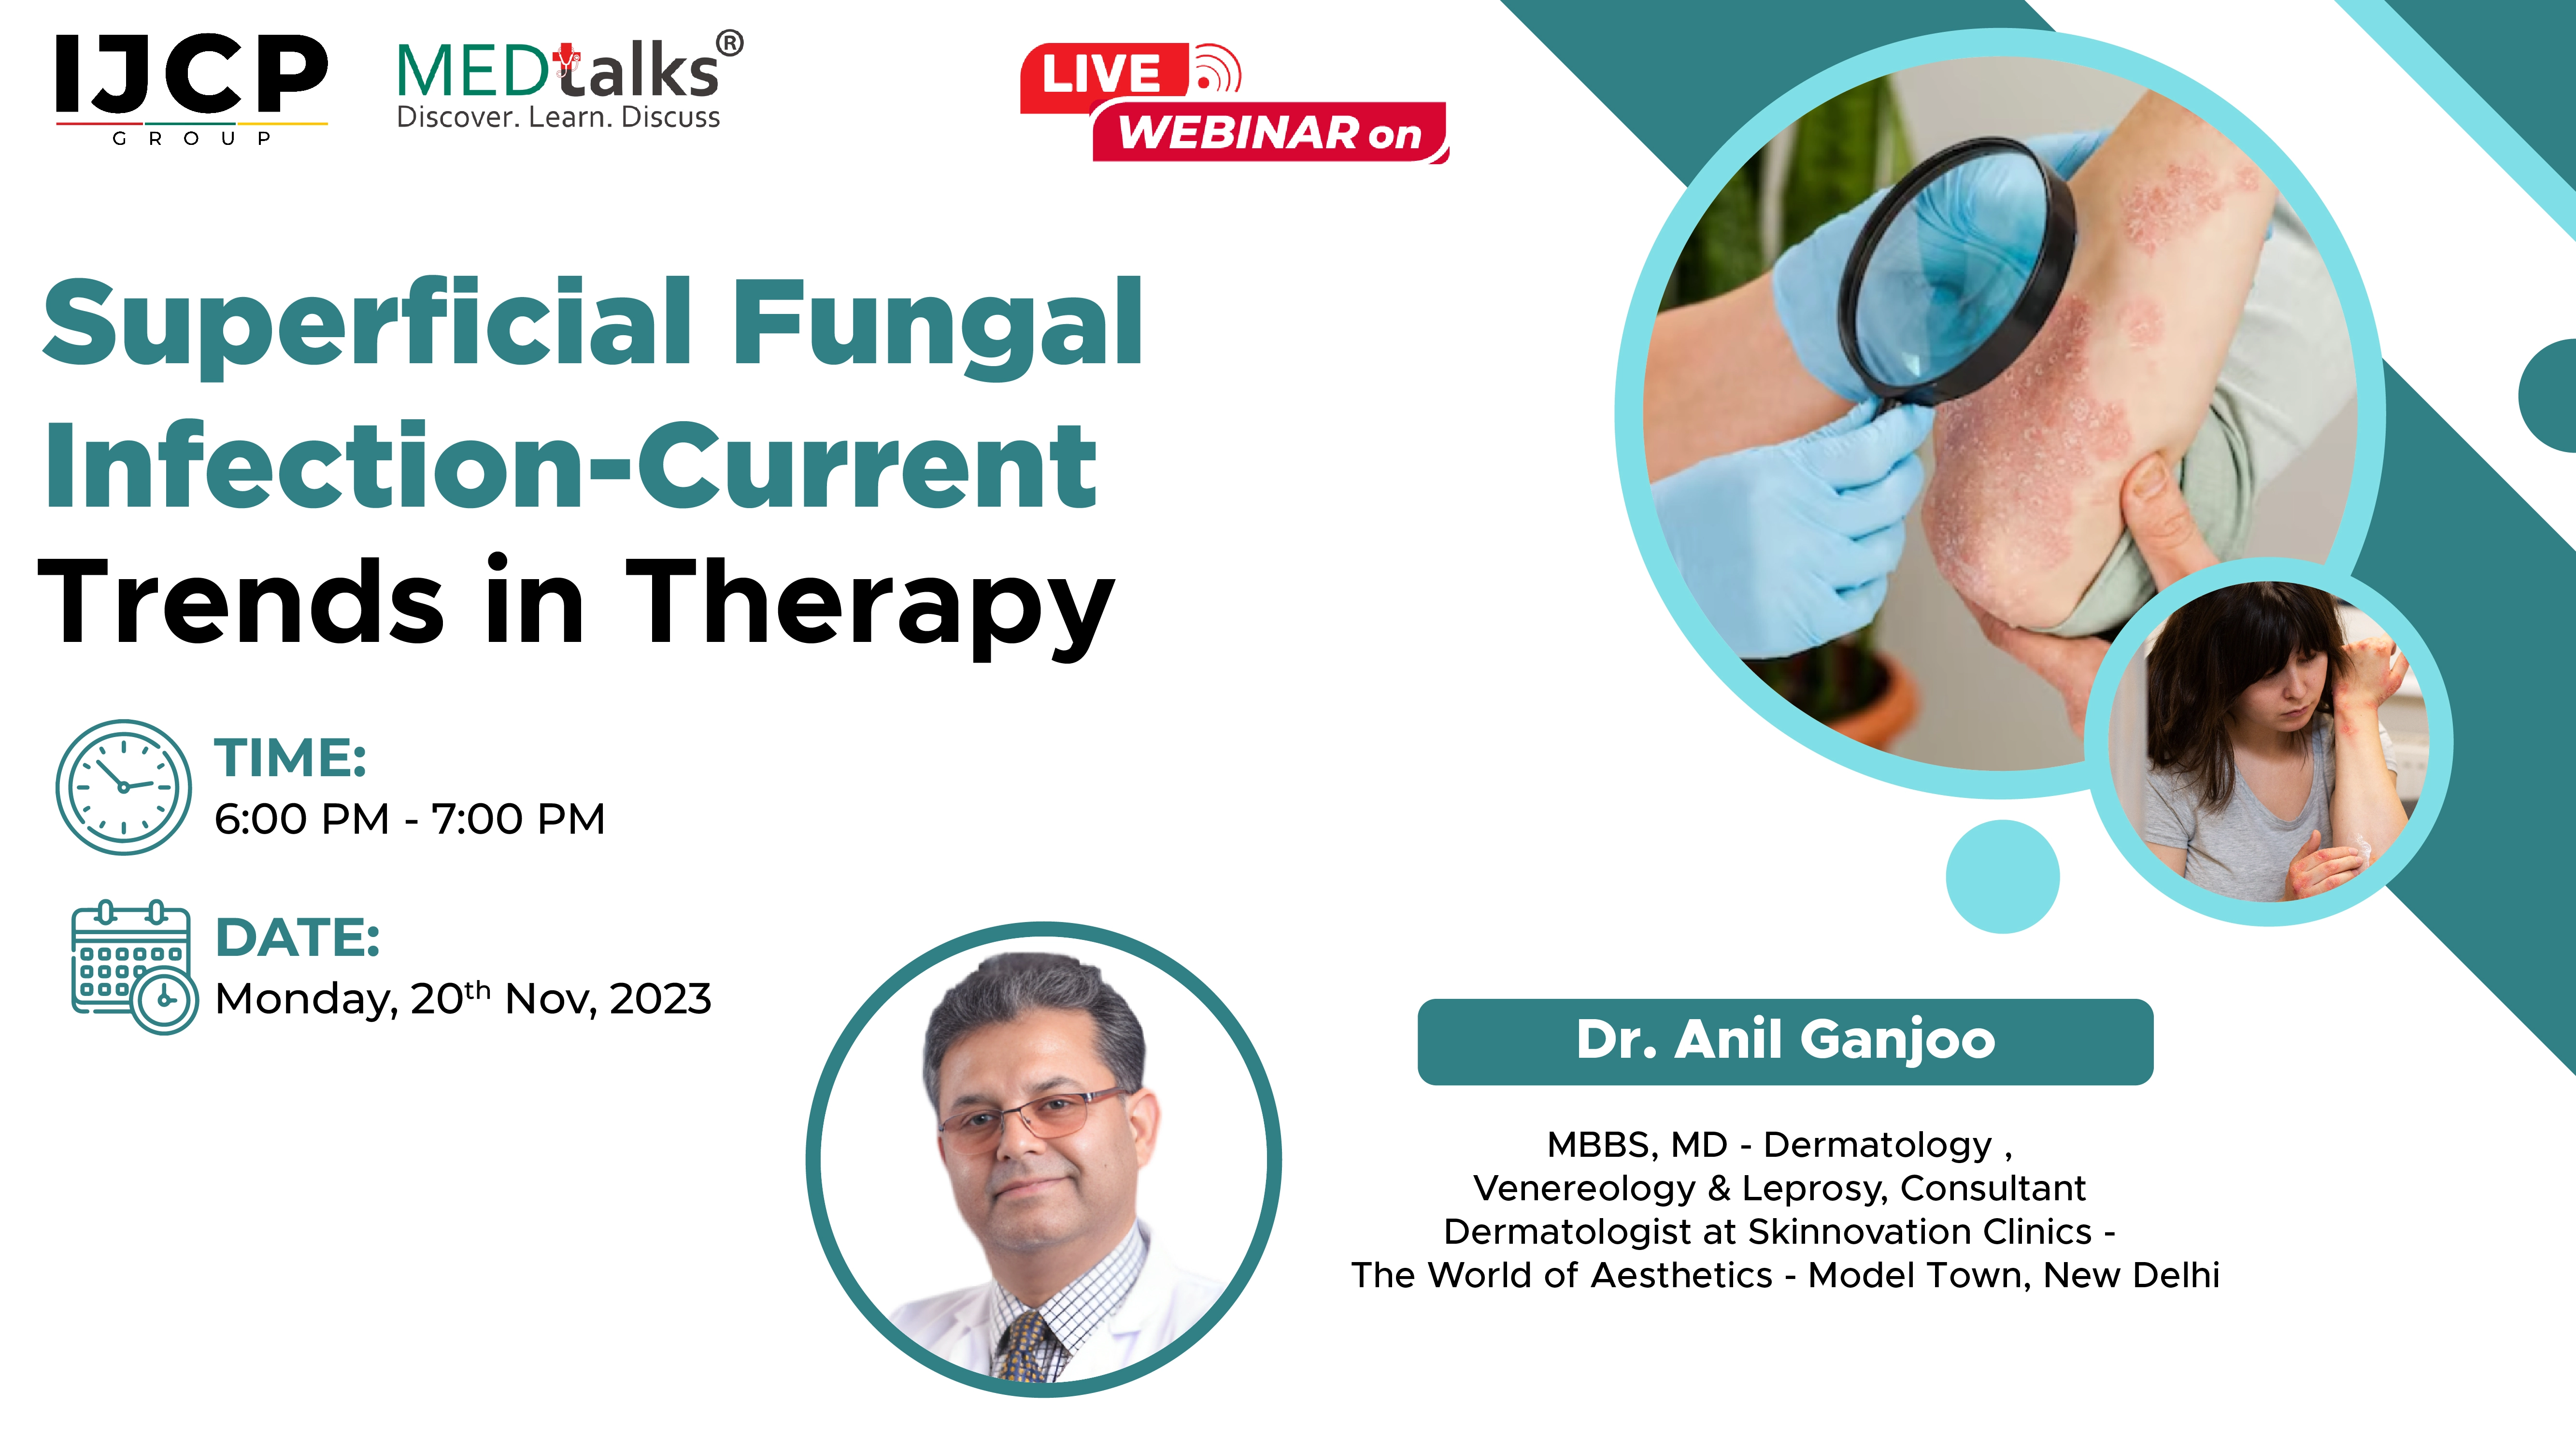 Superficial Fungal Infection- Current Trends in Therapy